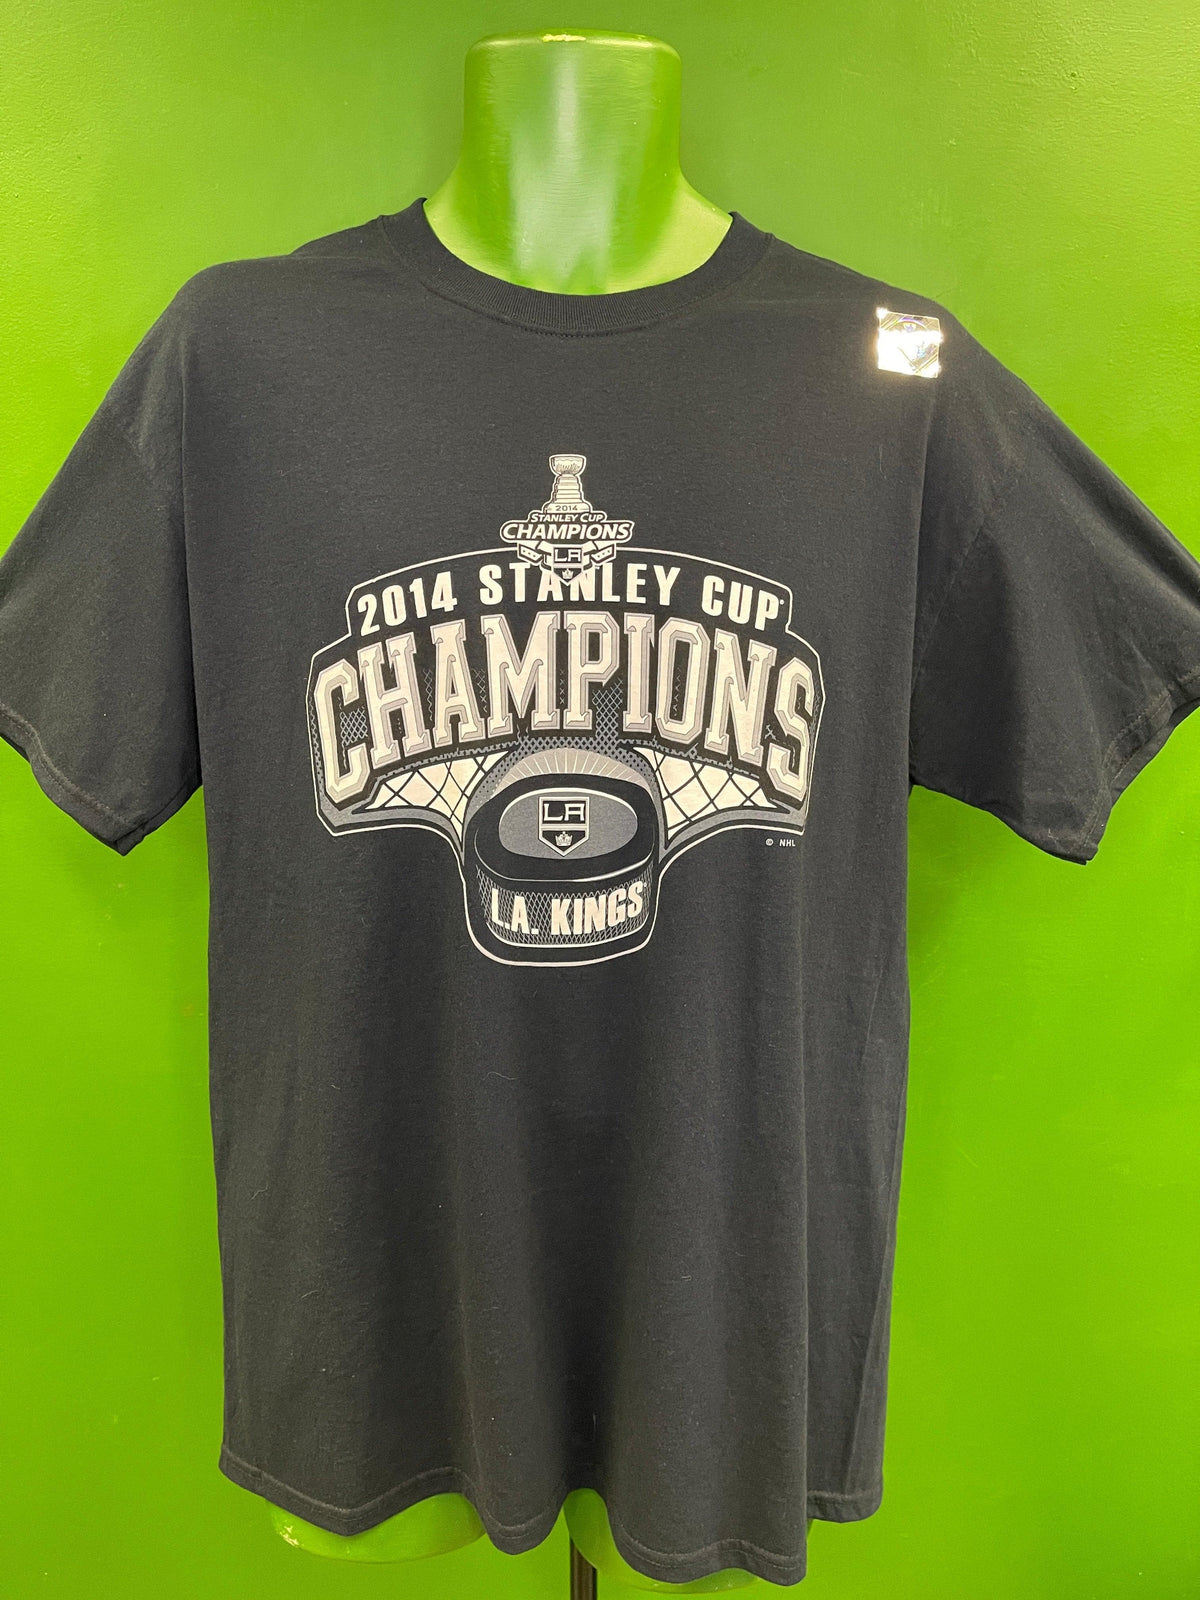 NHL Los Angeles Kings 2014 Stanley Cup Champions T-Shirt Men's Large NWT